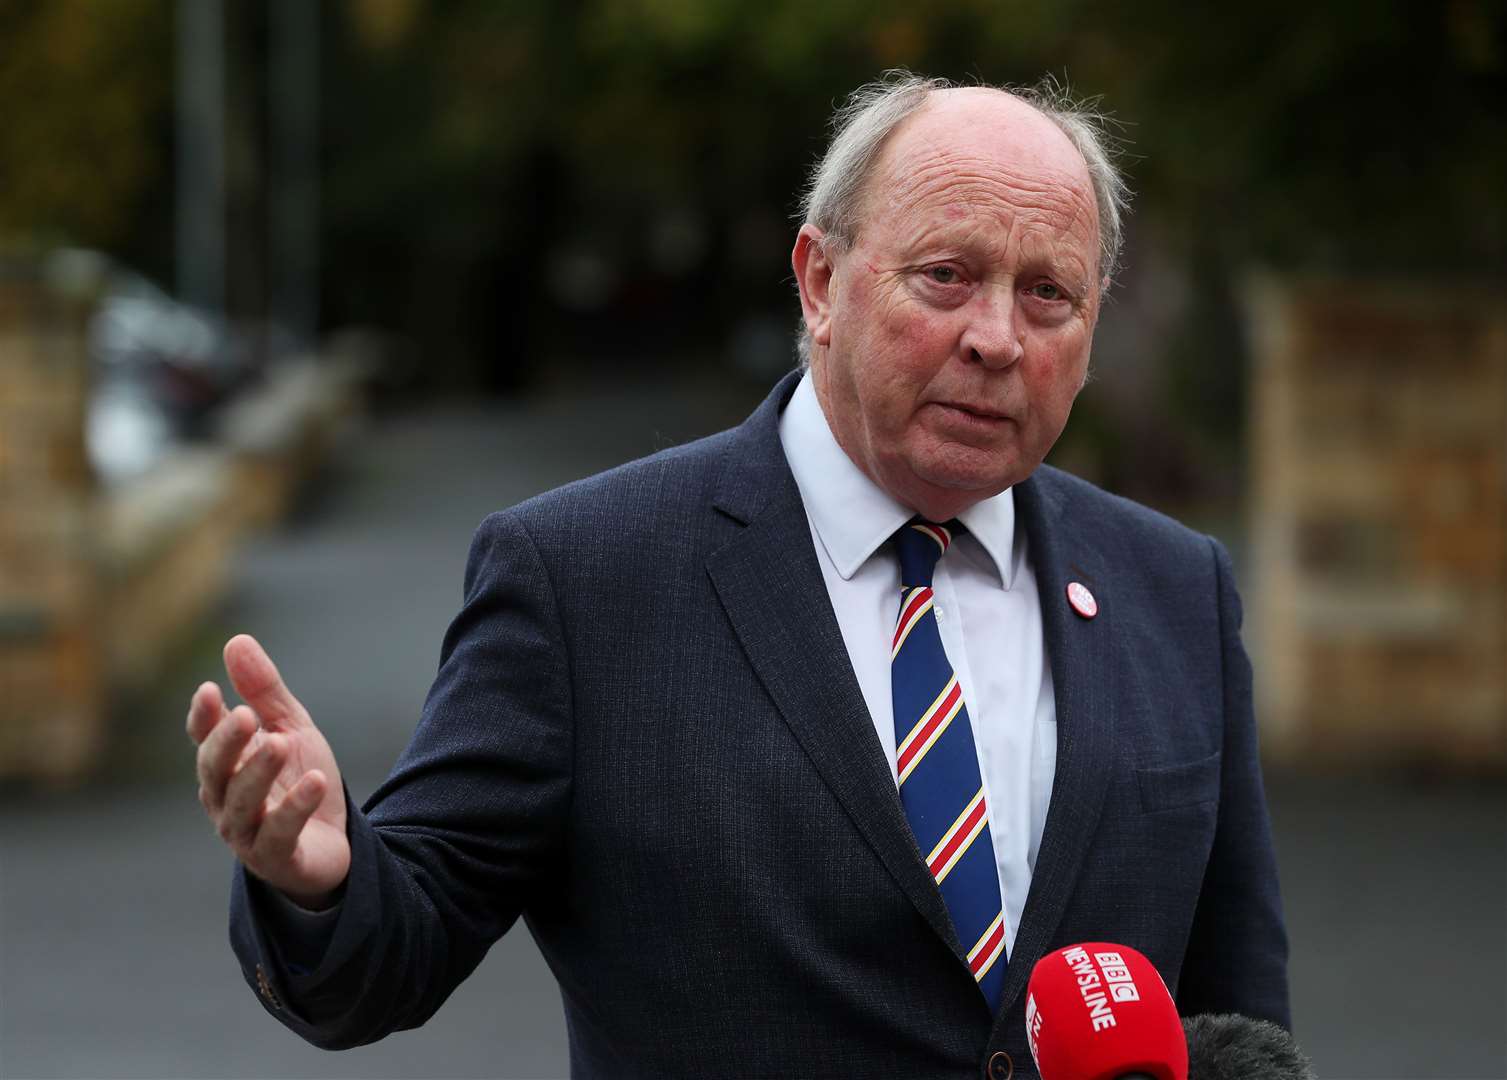 TUV leader Jim Allister speaks to the media ahead of the event for UDR families in Clogher (Brian Lawless/PA)